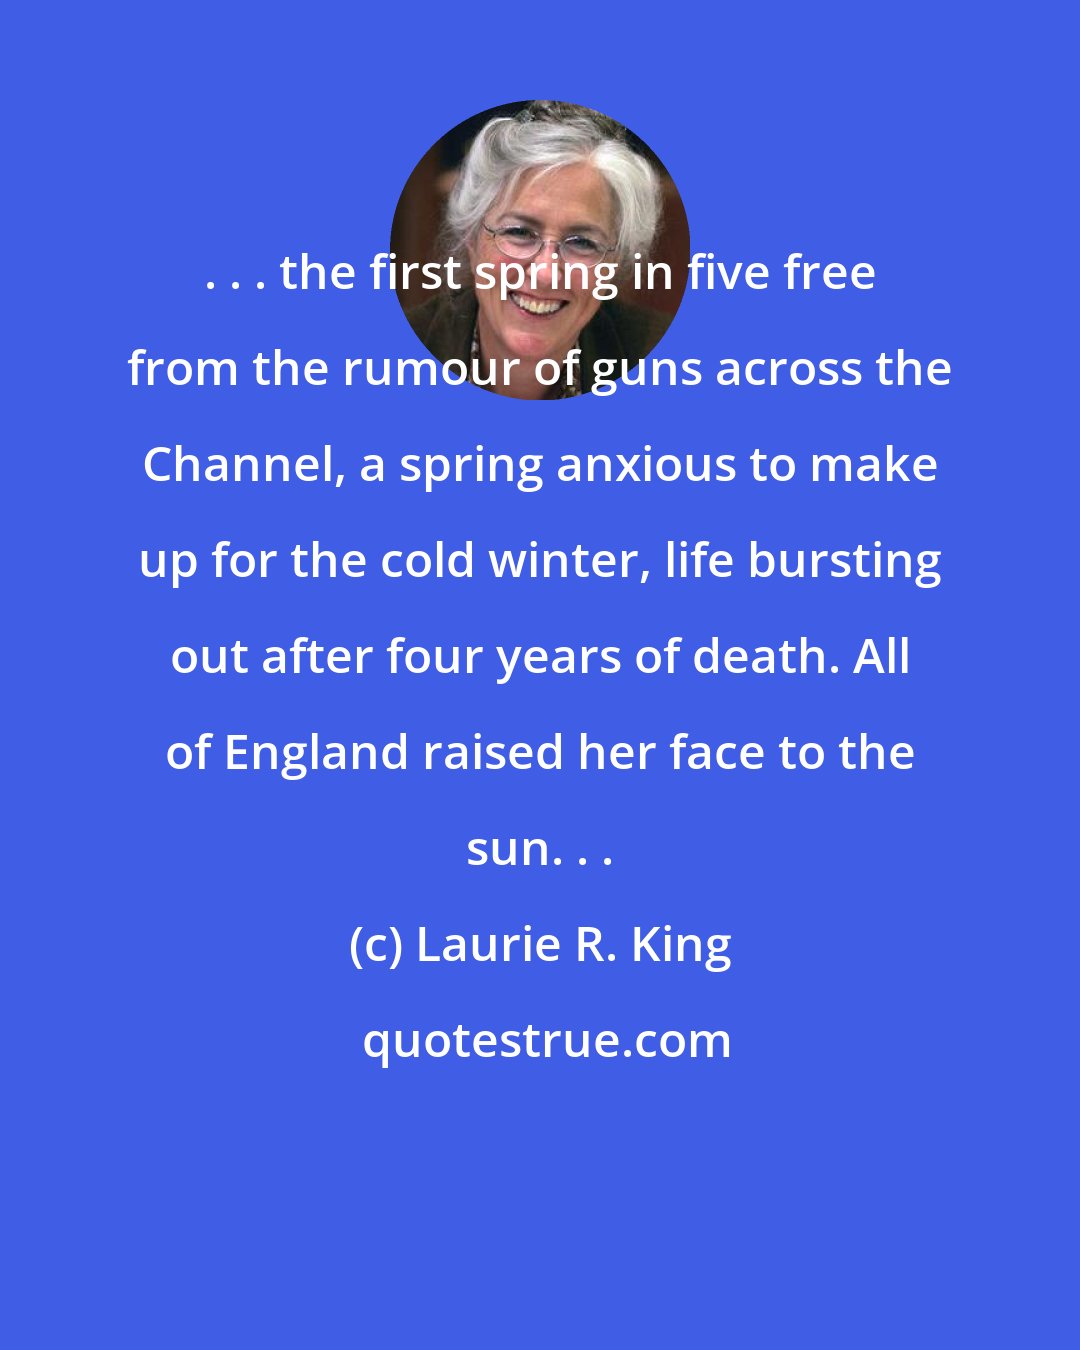 Laurie R. King: . . . the first spring in five free from the rumour of guns across the Channel, a spring anxious to make up for the cold winter, life bursting out after four years of death. All of England raised her face to the sun. . .